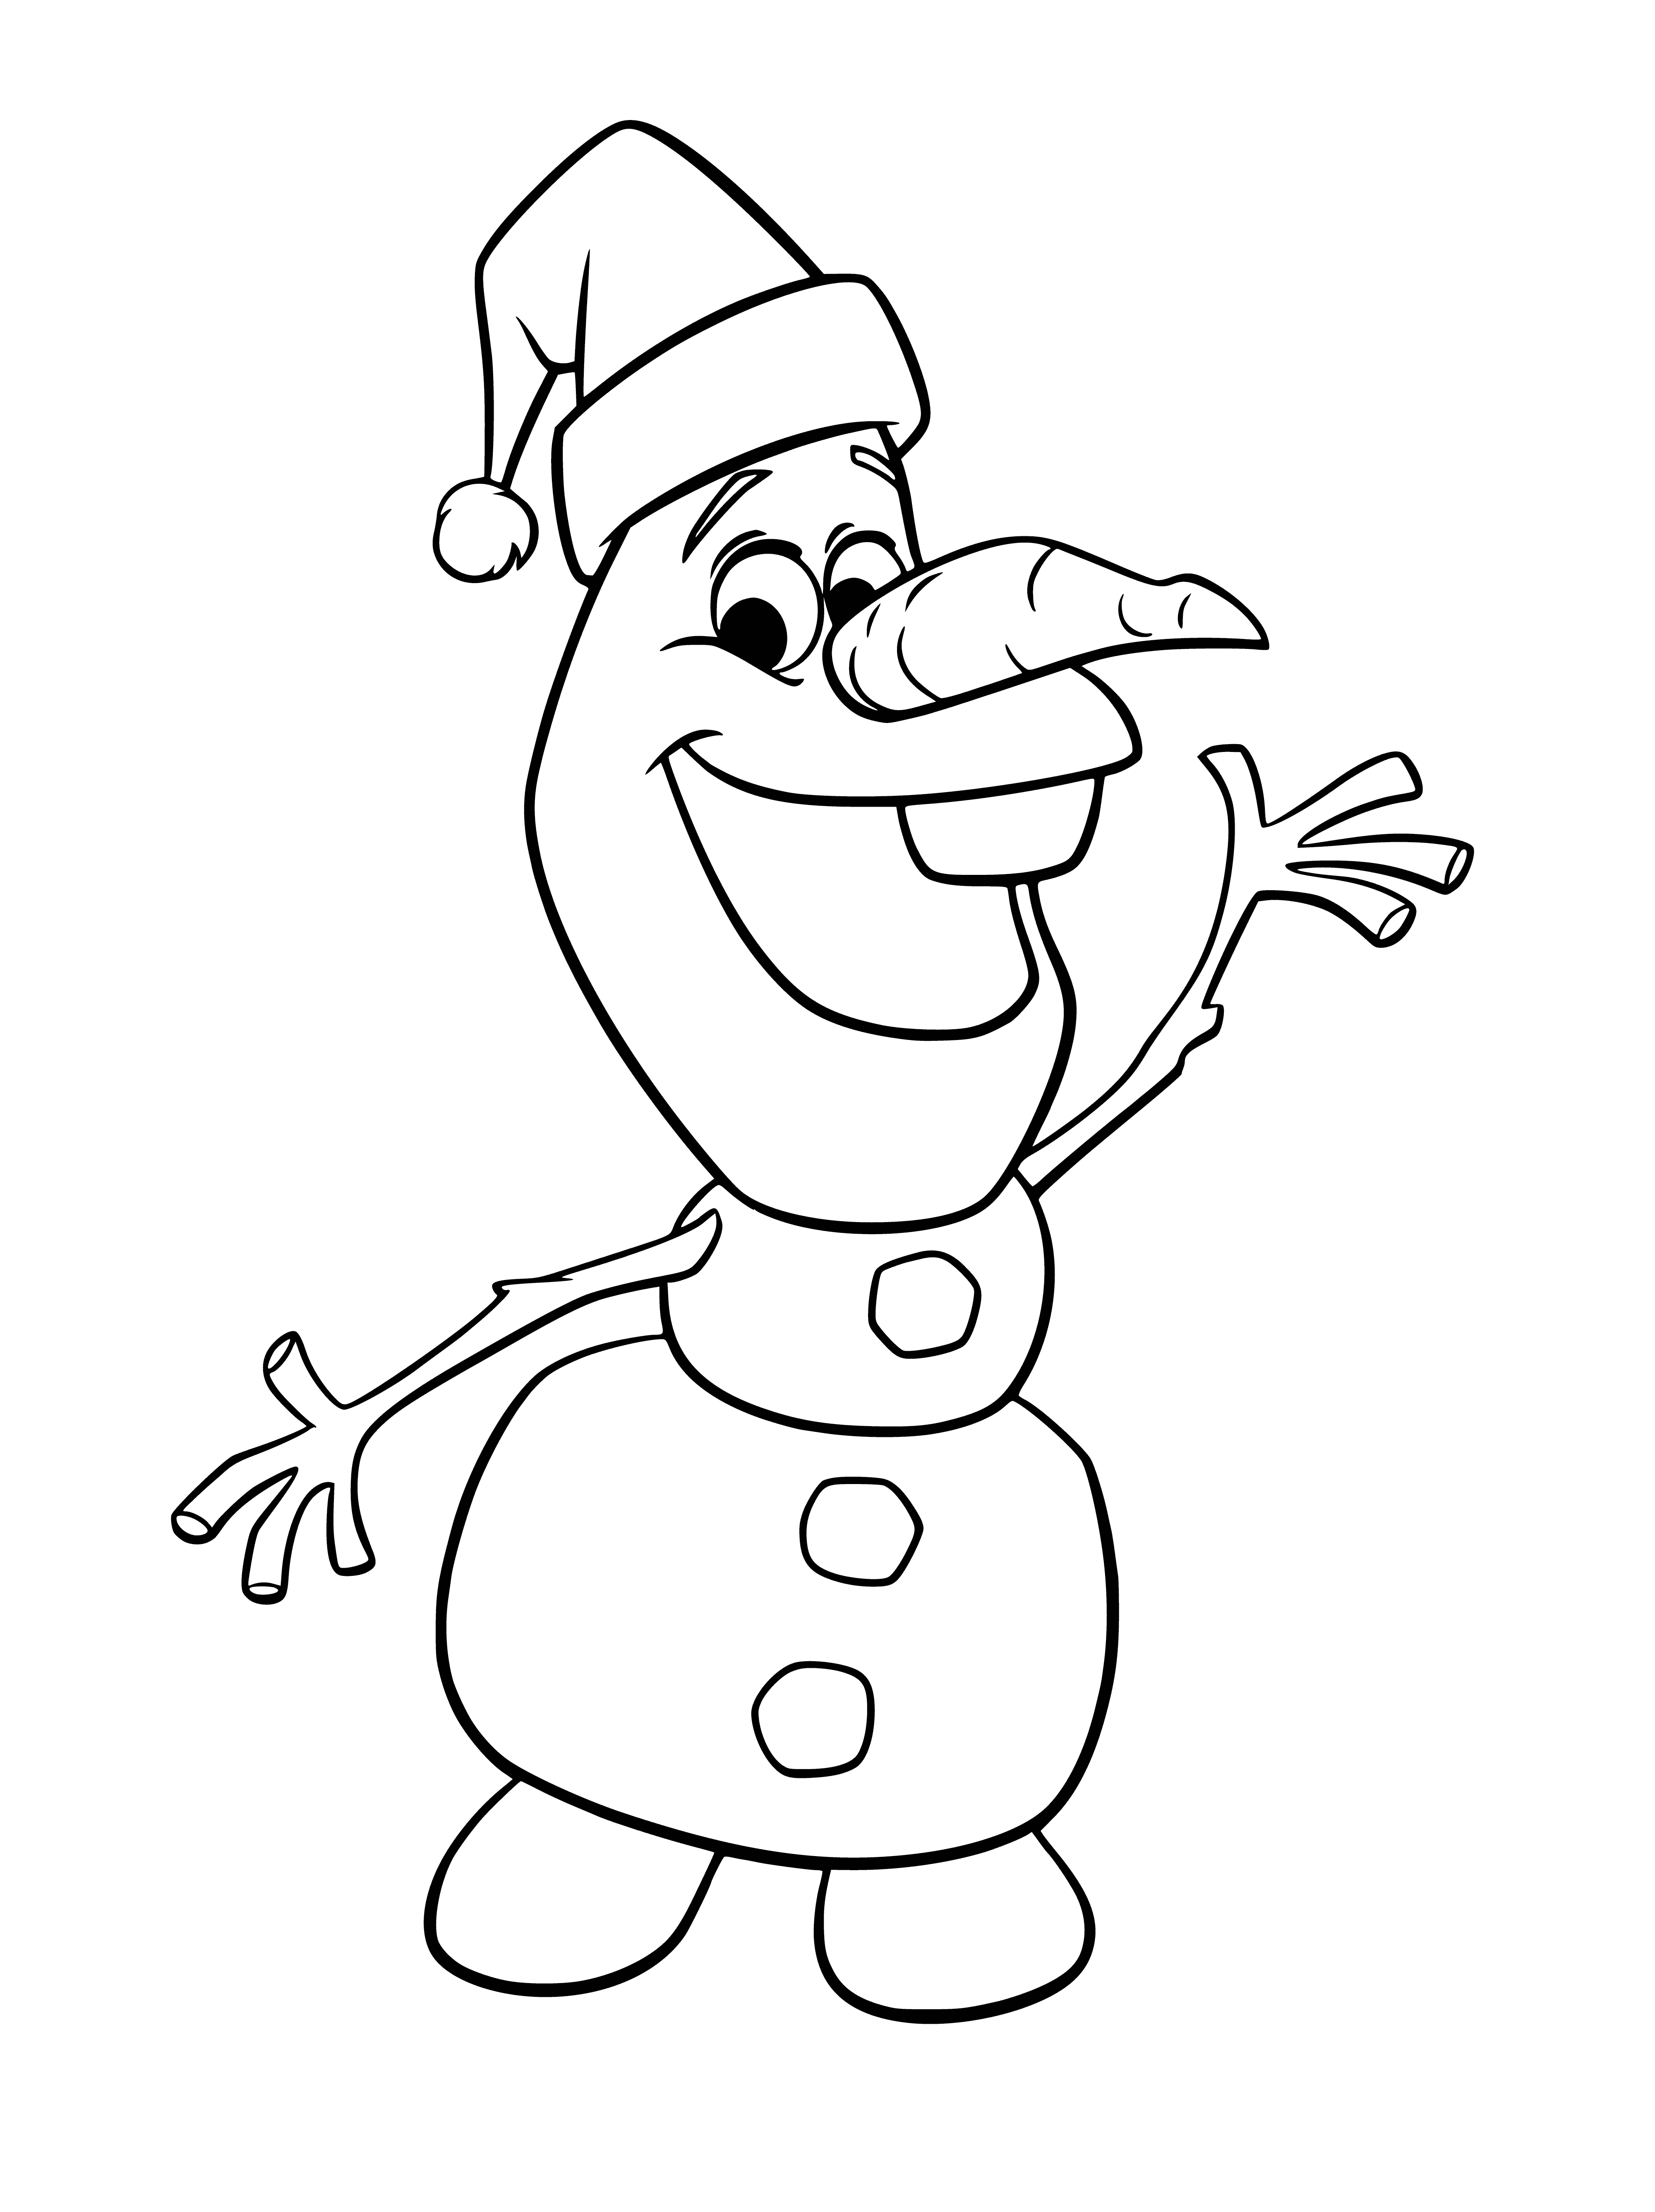 coloring page: Disney Characters have a New Year's celebration - Snowman Olaf is surrounded by friends, happy to ring in the New Year! #Disney #NewYearsEve